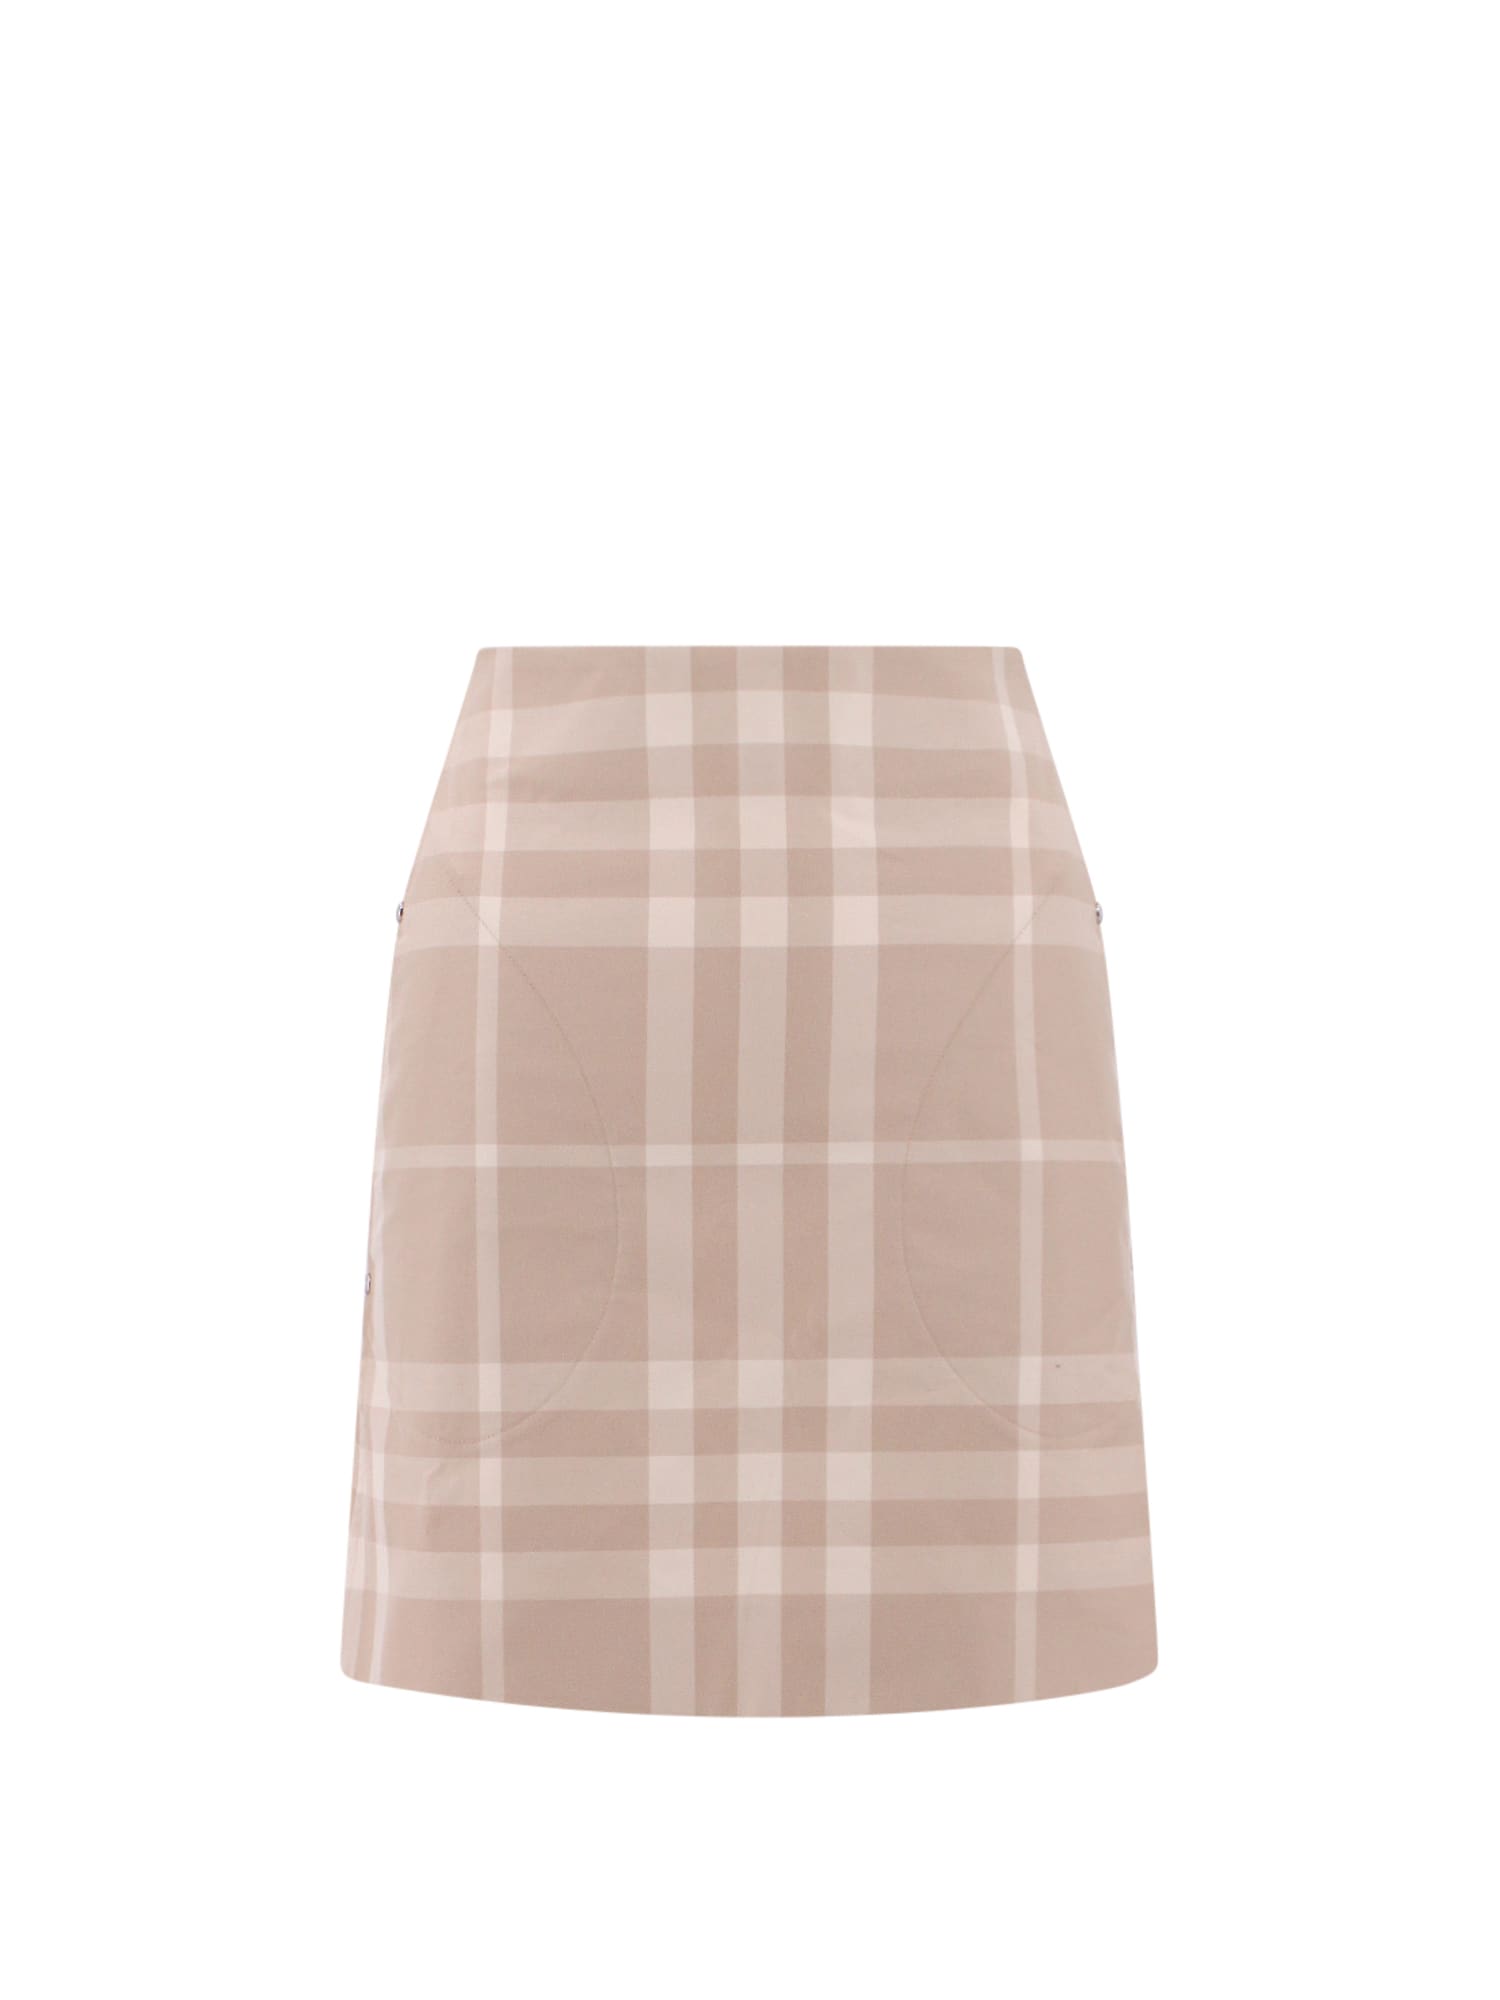 Women's BURBERRY Skirts Sale, Up To 70% Off | ModeSens